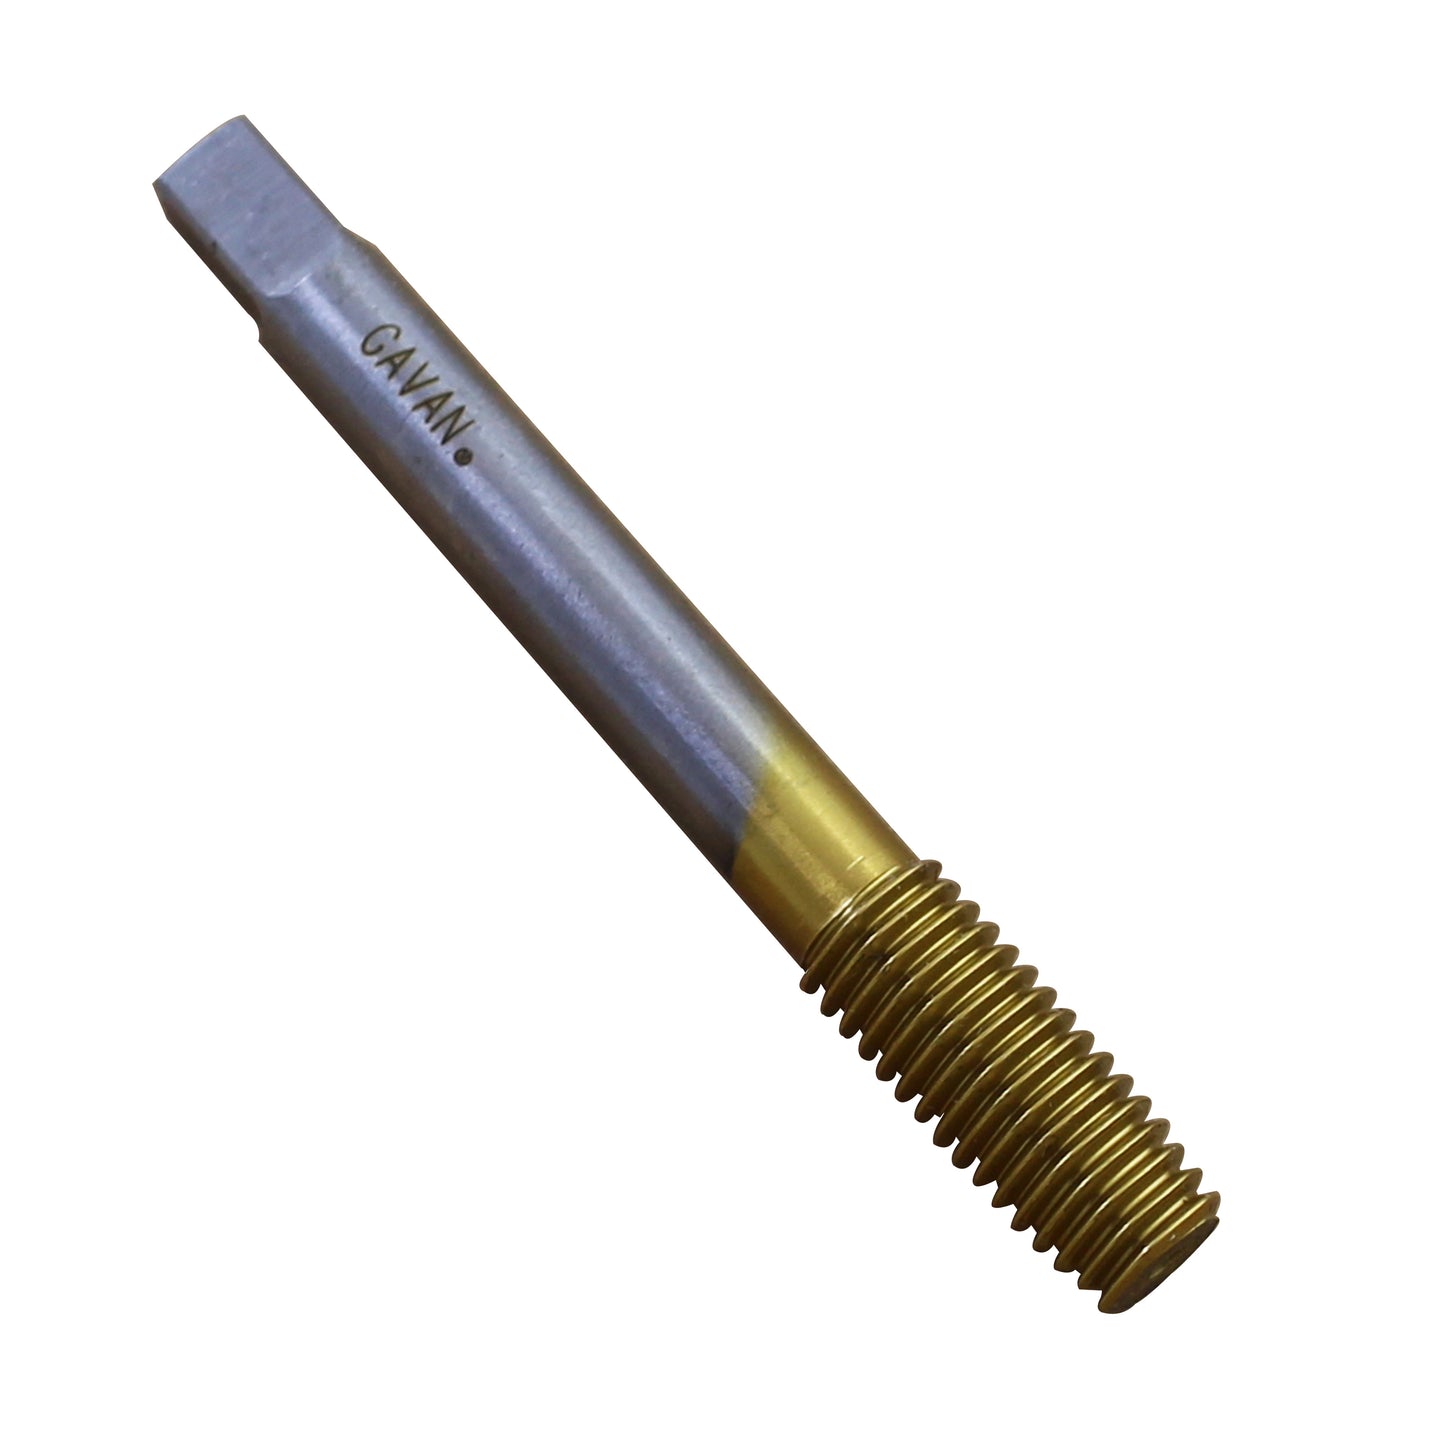 7/16" - 20 HSS Unified Right hand Thread Forming Tap